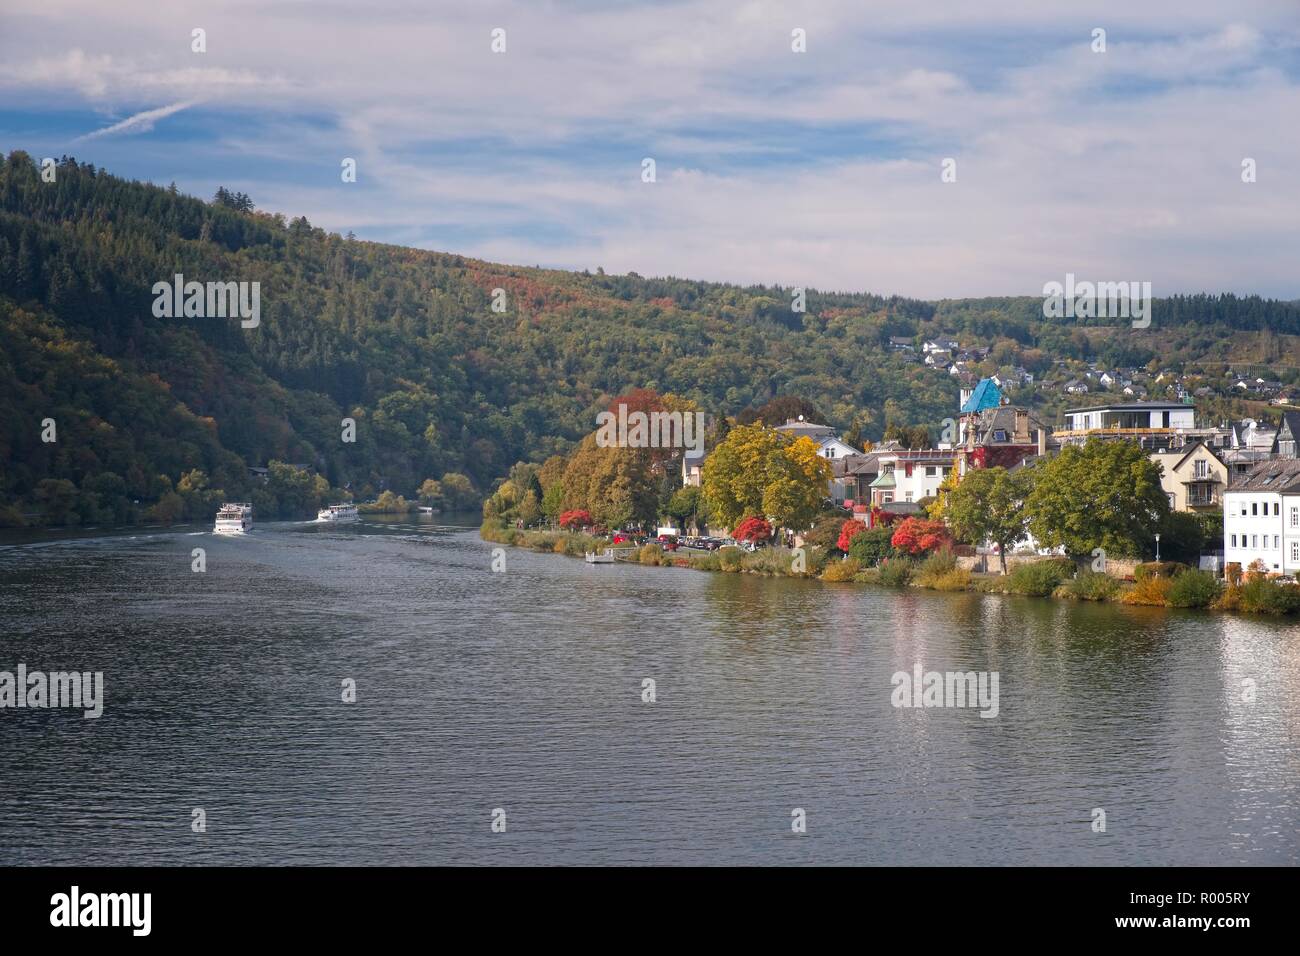 TRABEN-TRARBACH PLEASURE SHIPS ON THE RIVER IN AUTUMN IN AUTUMN THE RIVER MOSEL VALLEY GERMANY Stock Photo